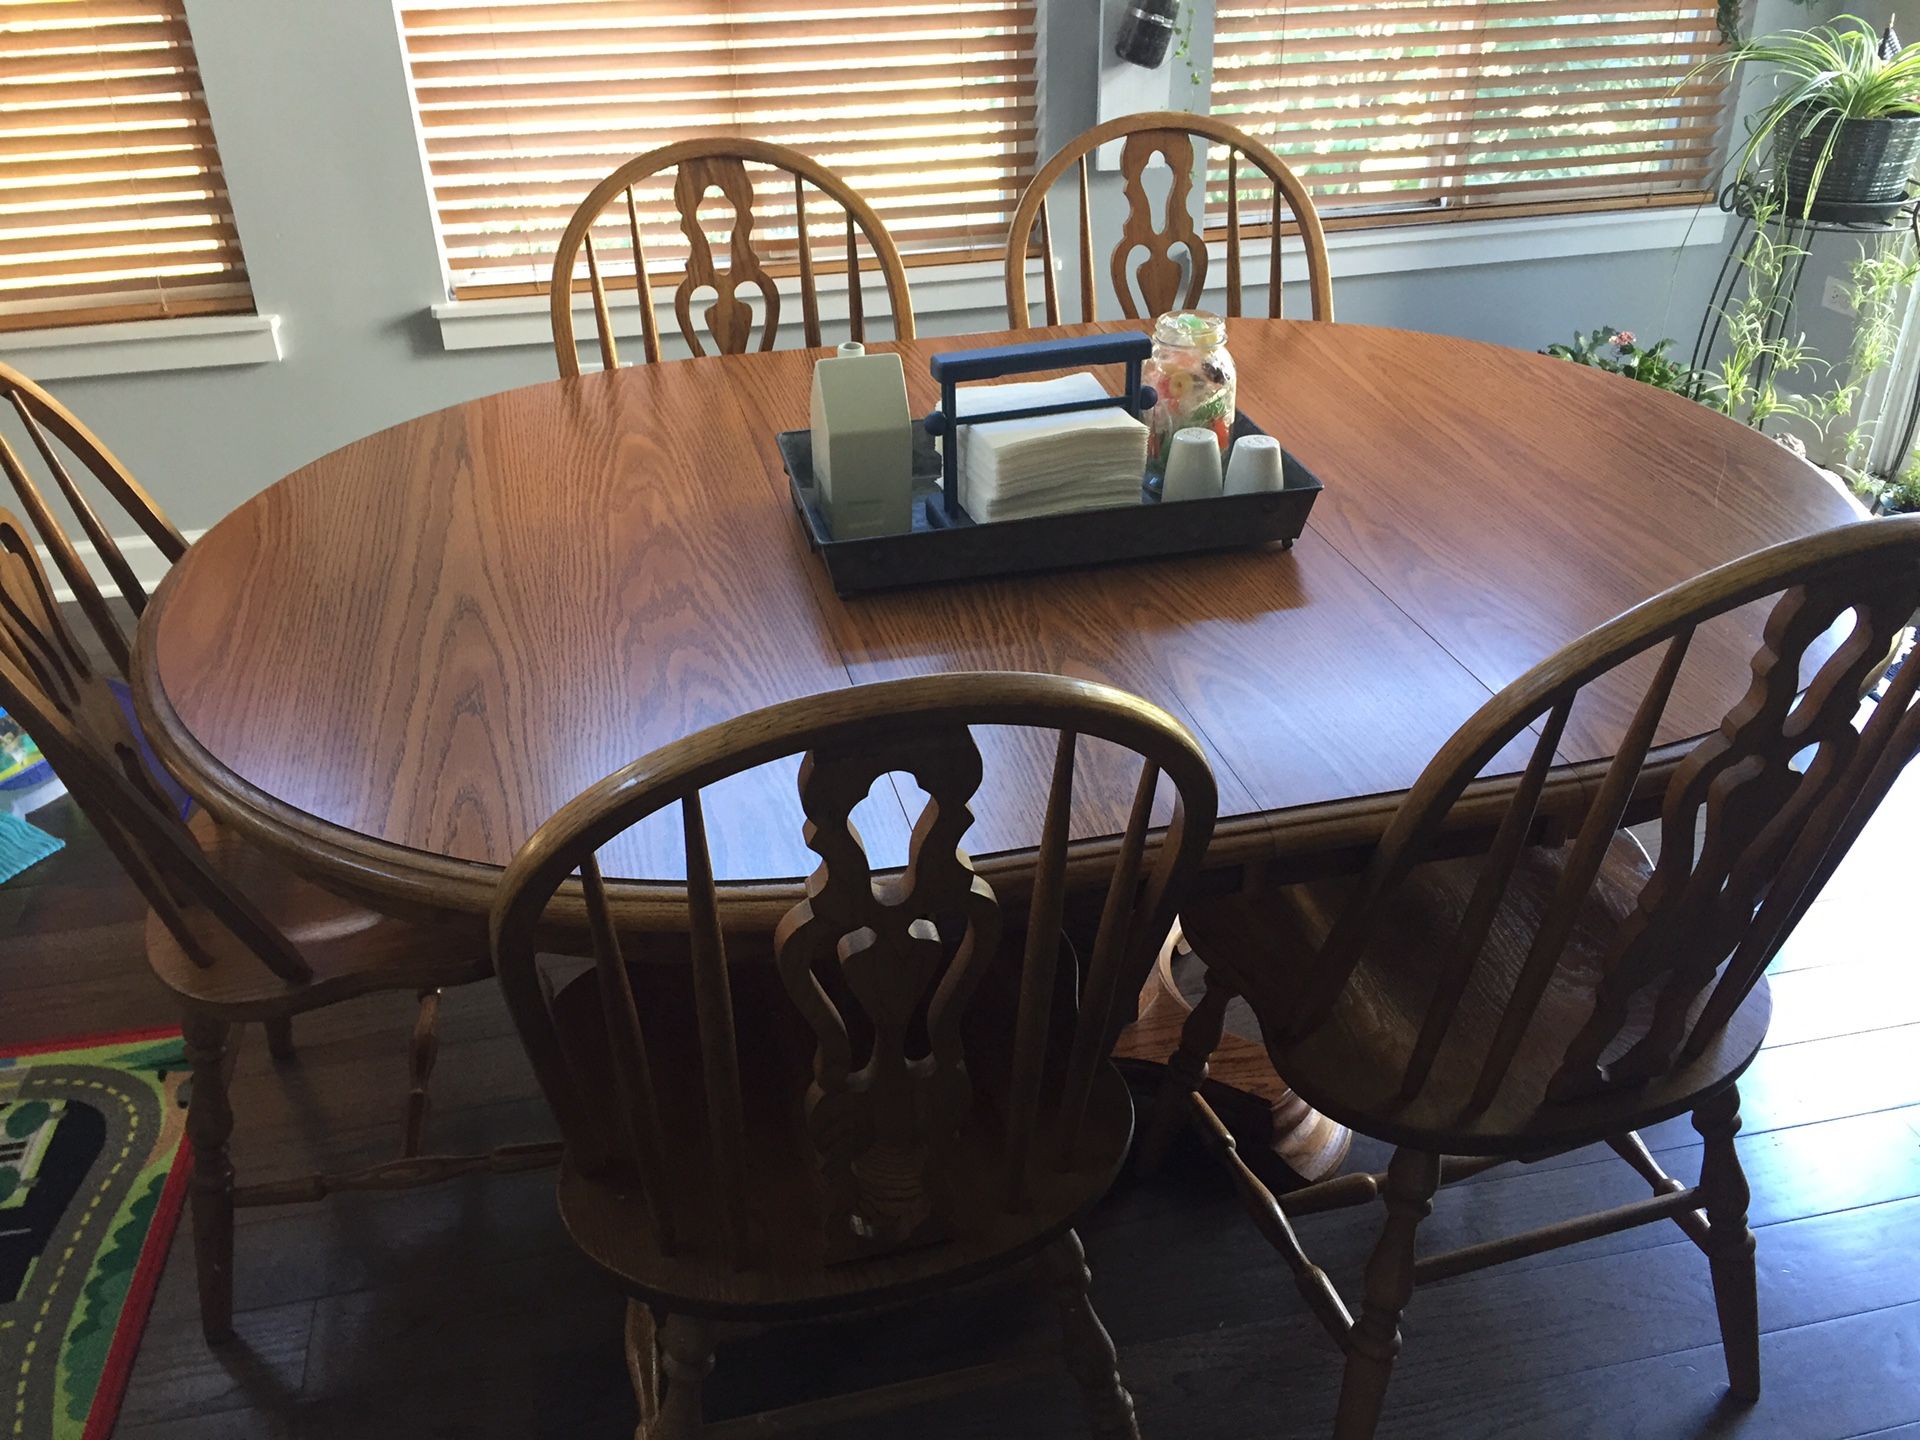 Oak kitchen table (48x48) 5 chairs and 2 leaves (68x48)